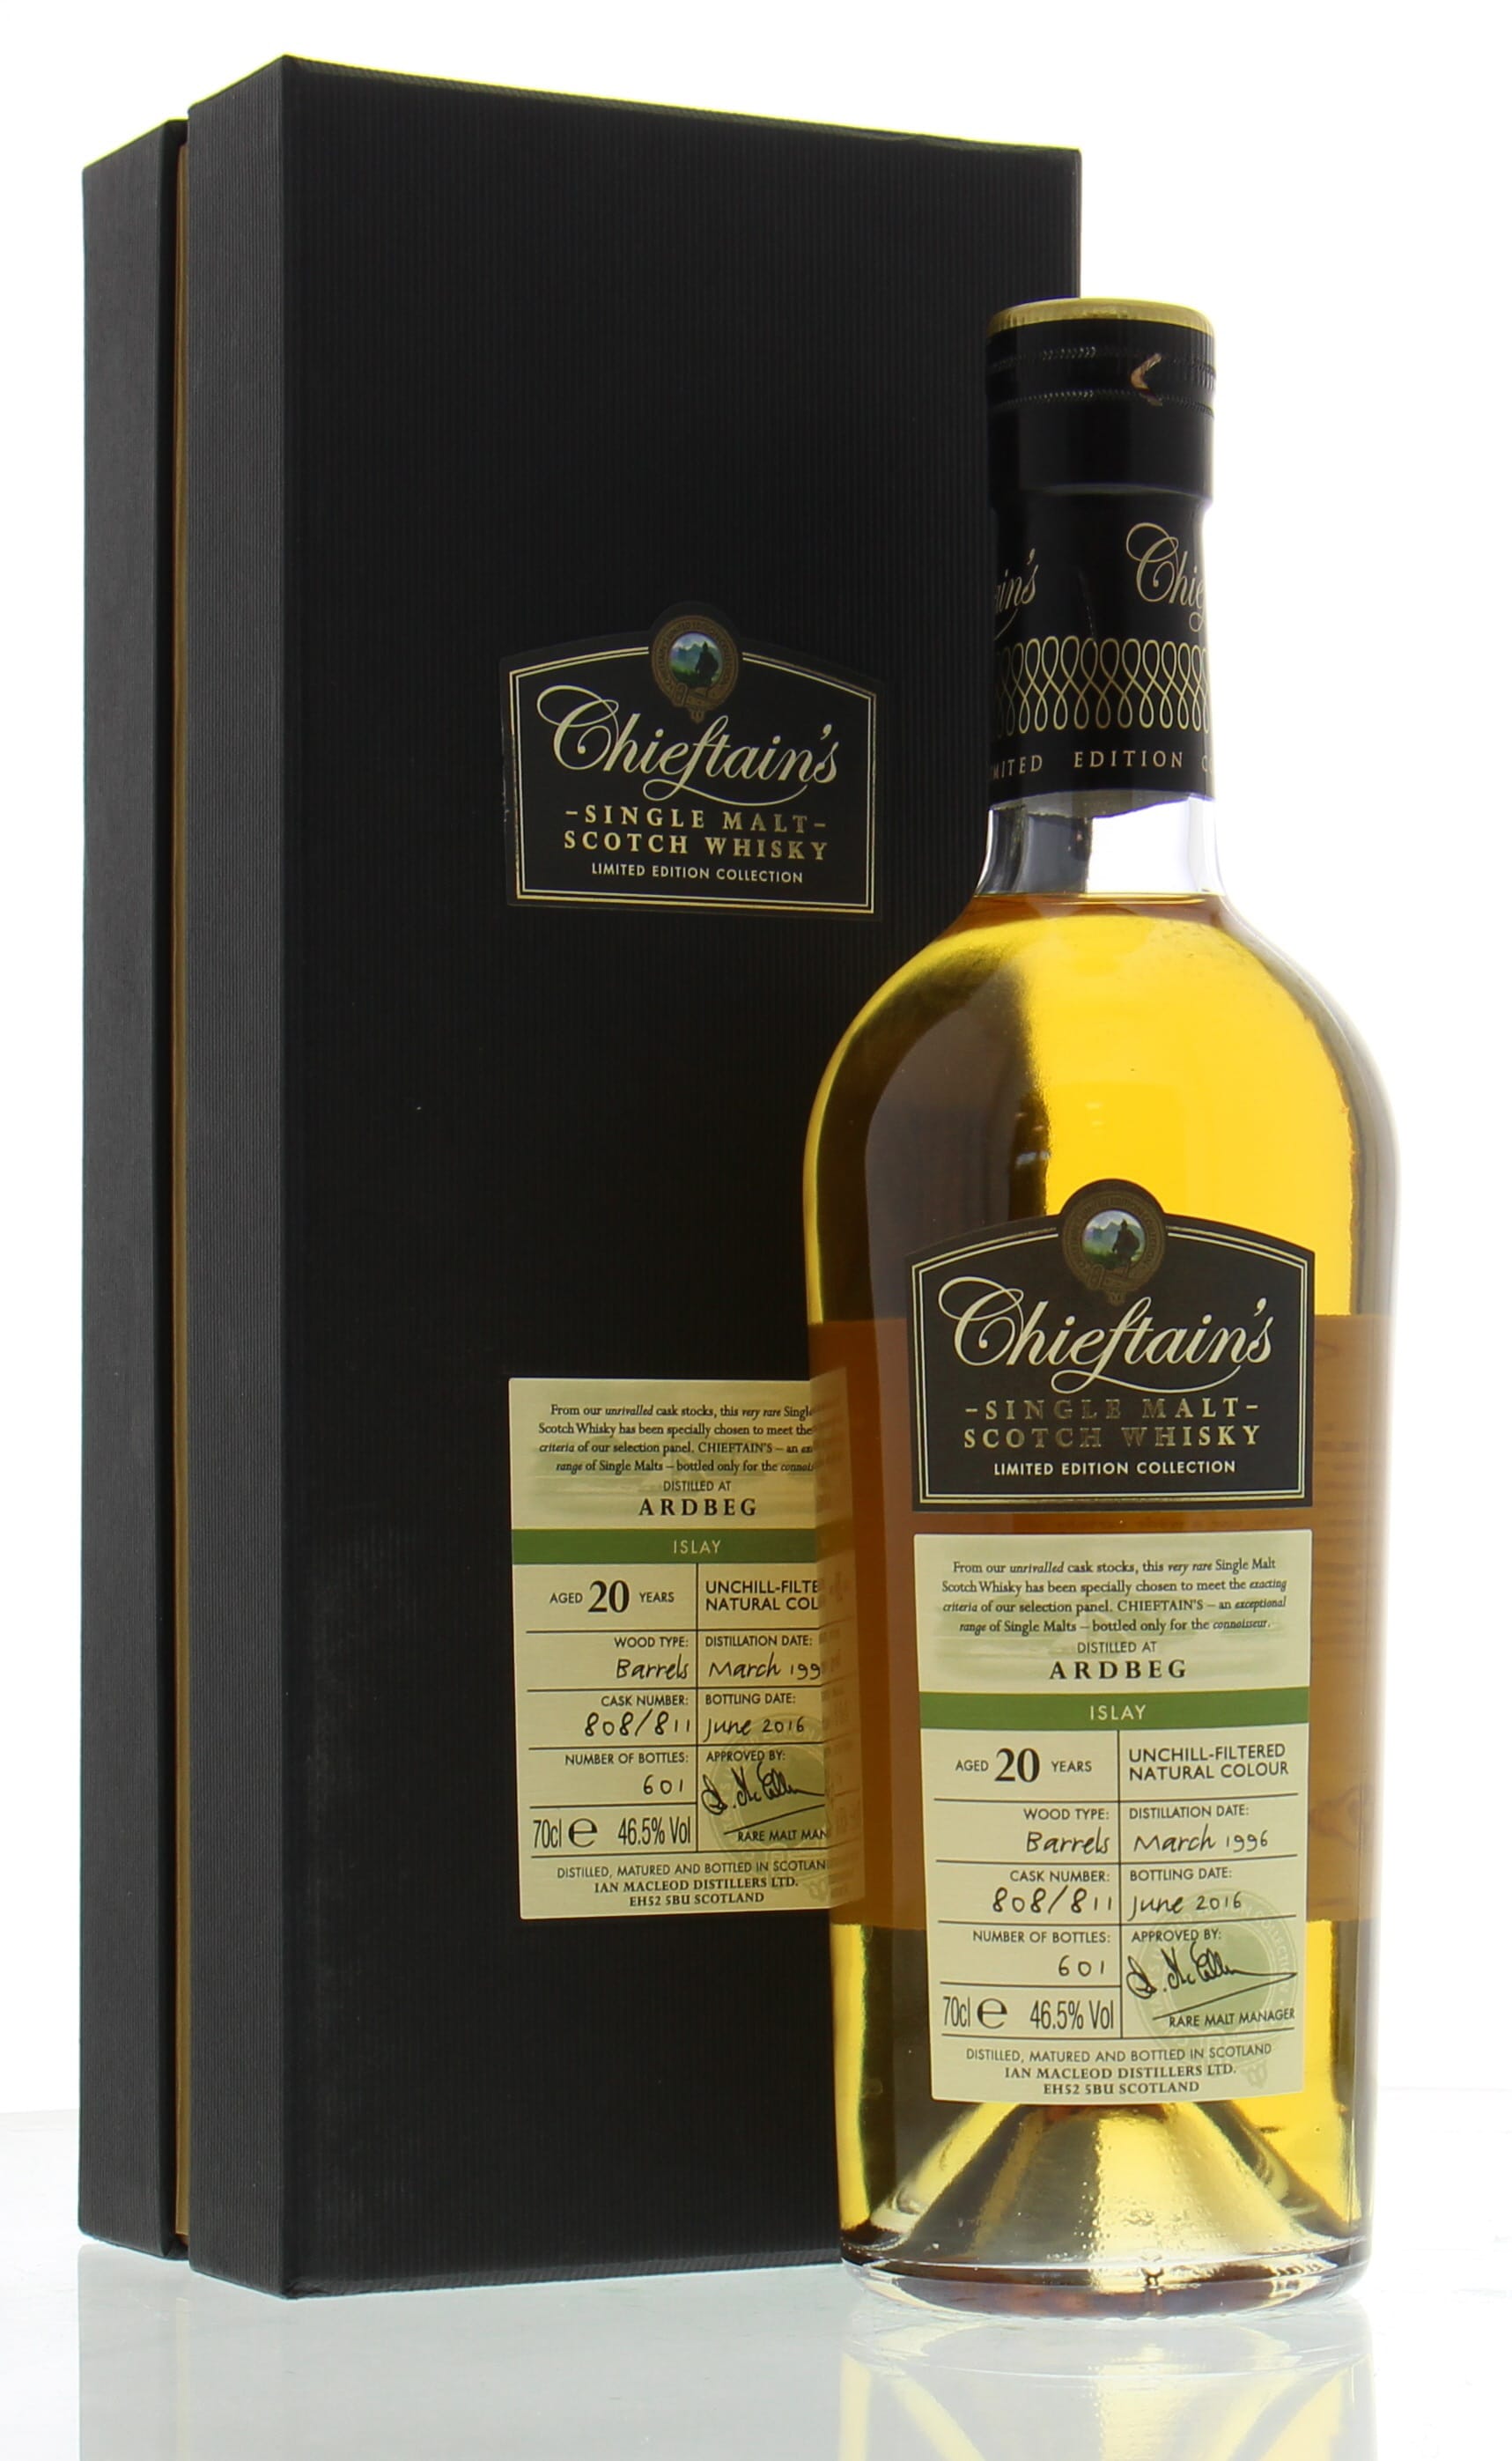 Ardbeg - 20 Years Old Chieftains Cask:808/811 46.5% 1996